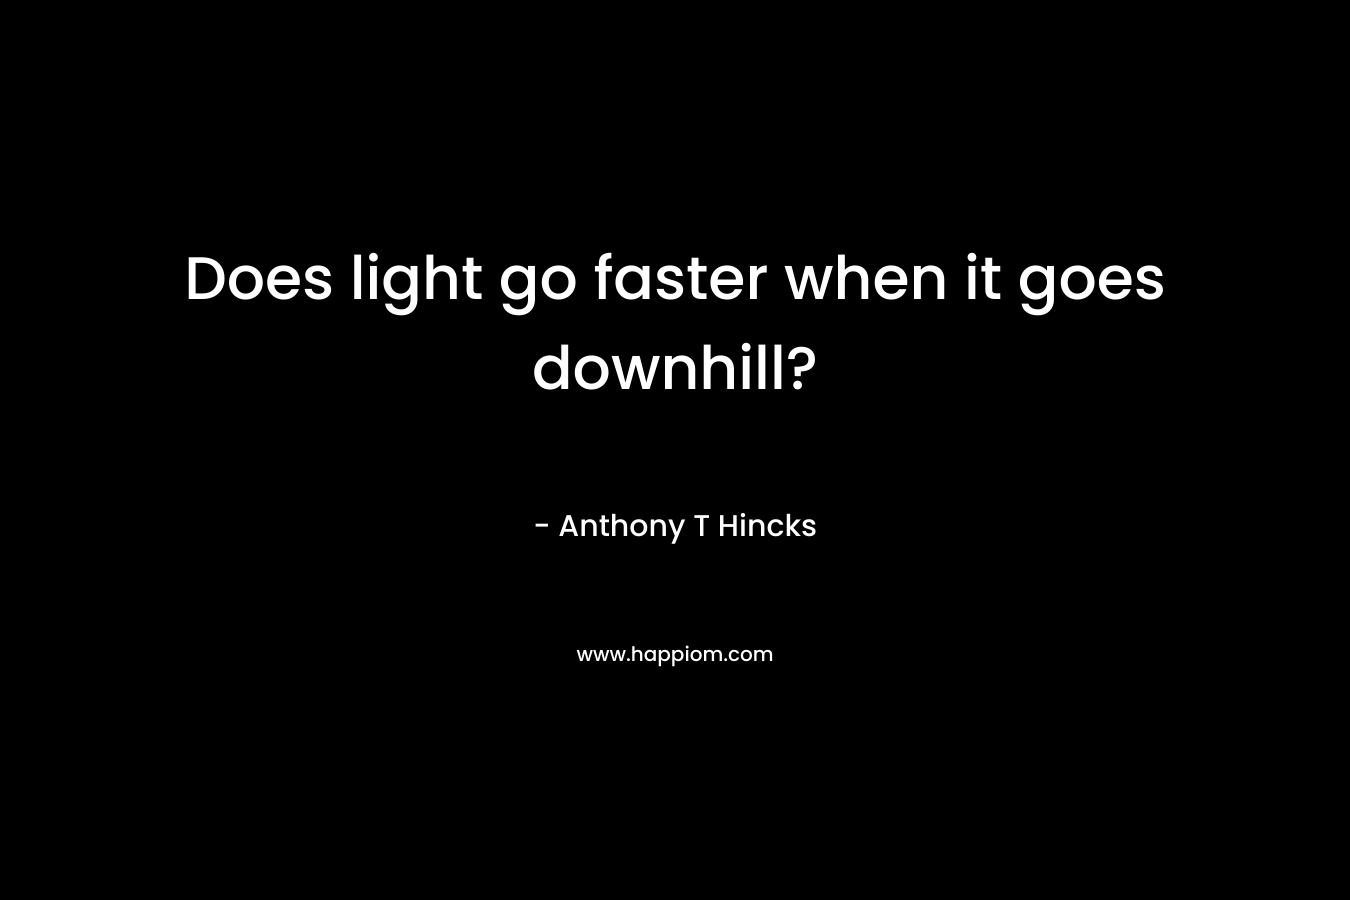 Does light go faster when it goes downhill?